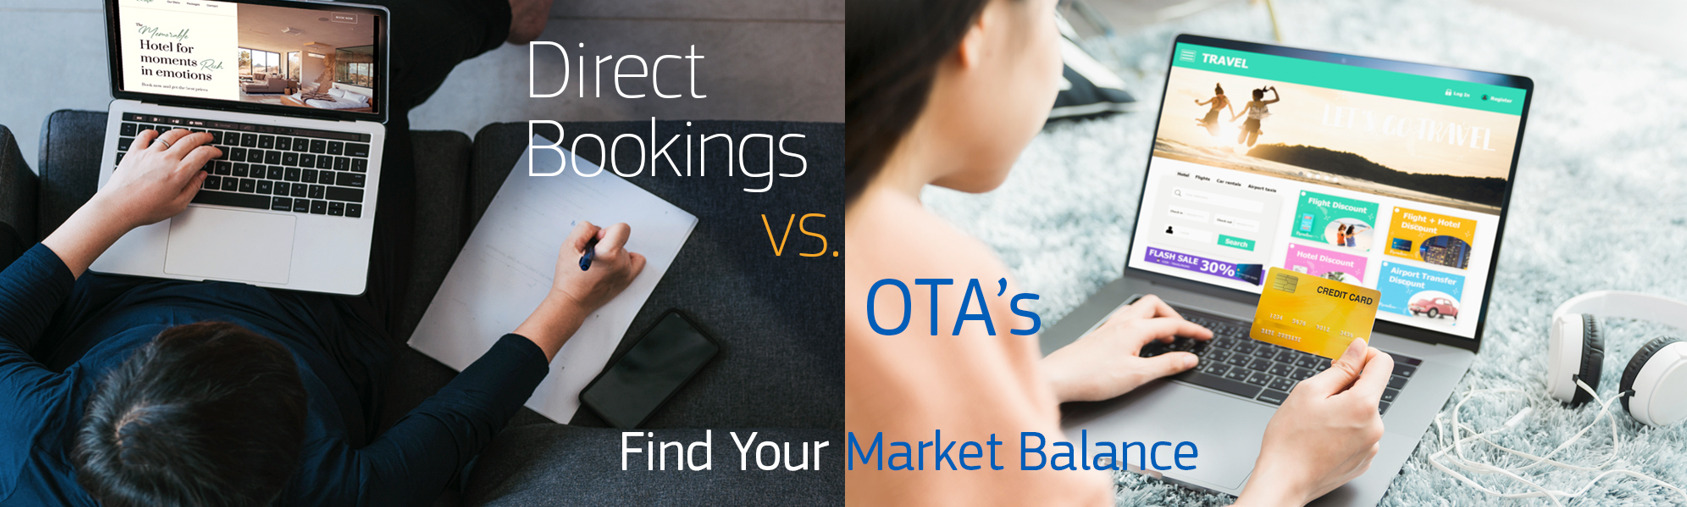 OTAs vs. Direct Bookings: Find Your Market Balance